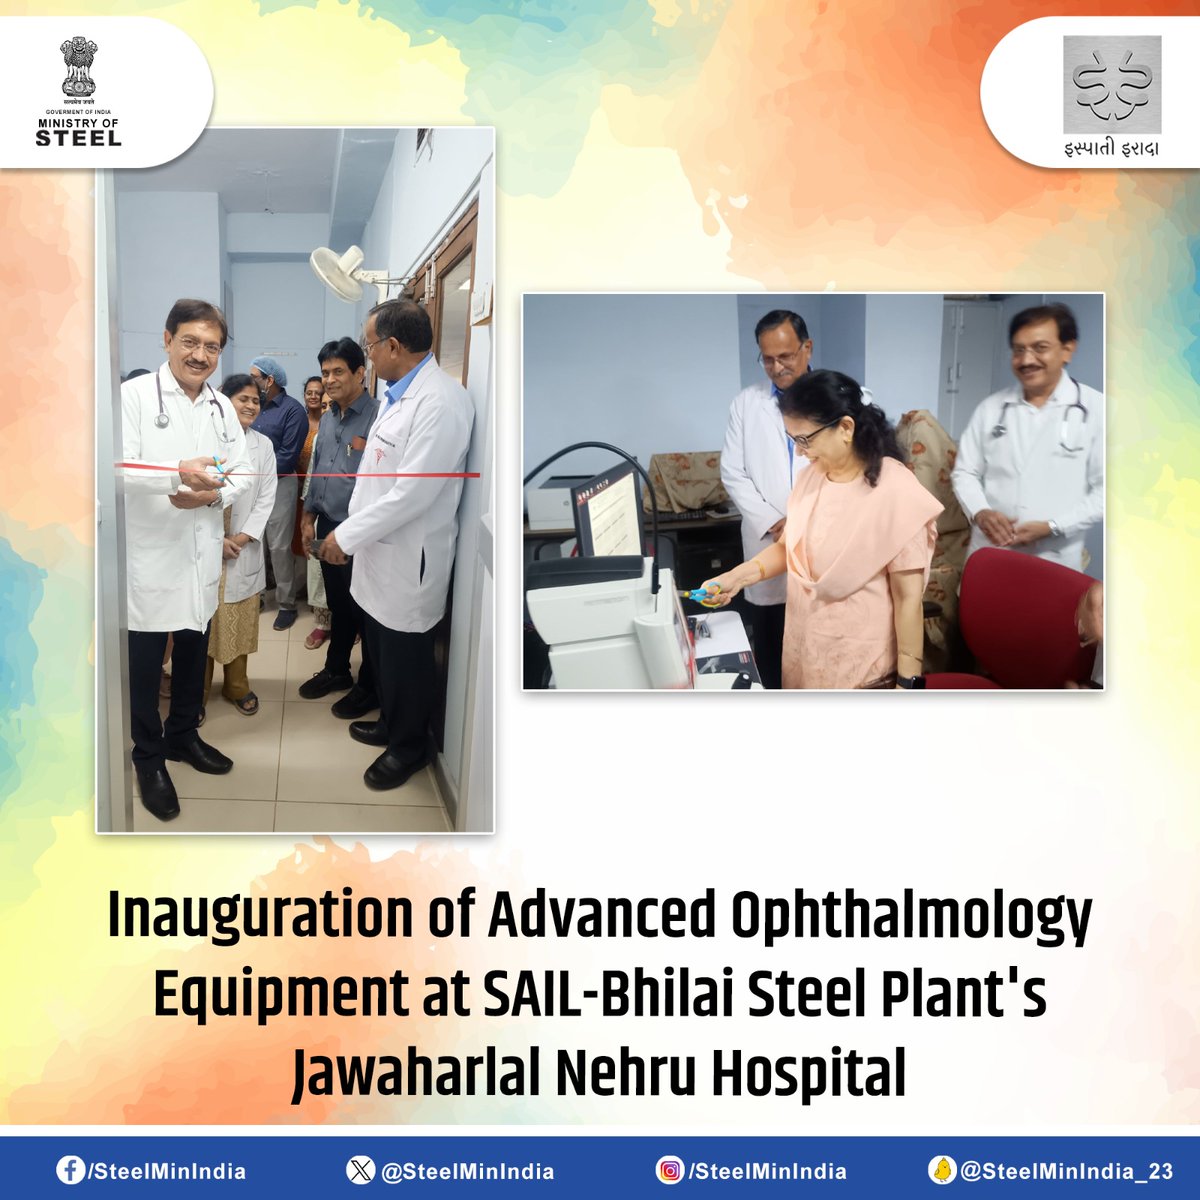 State-of-the-art Optical Biometry, Automated Perimetry, and Phacoemulsification machines have been inaugurated at #SAIL-#BhilaiSteelPlant’s Jawaharlal Nehru Hospital, enhancing the Ophthalmology Department's capabilities.